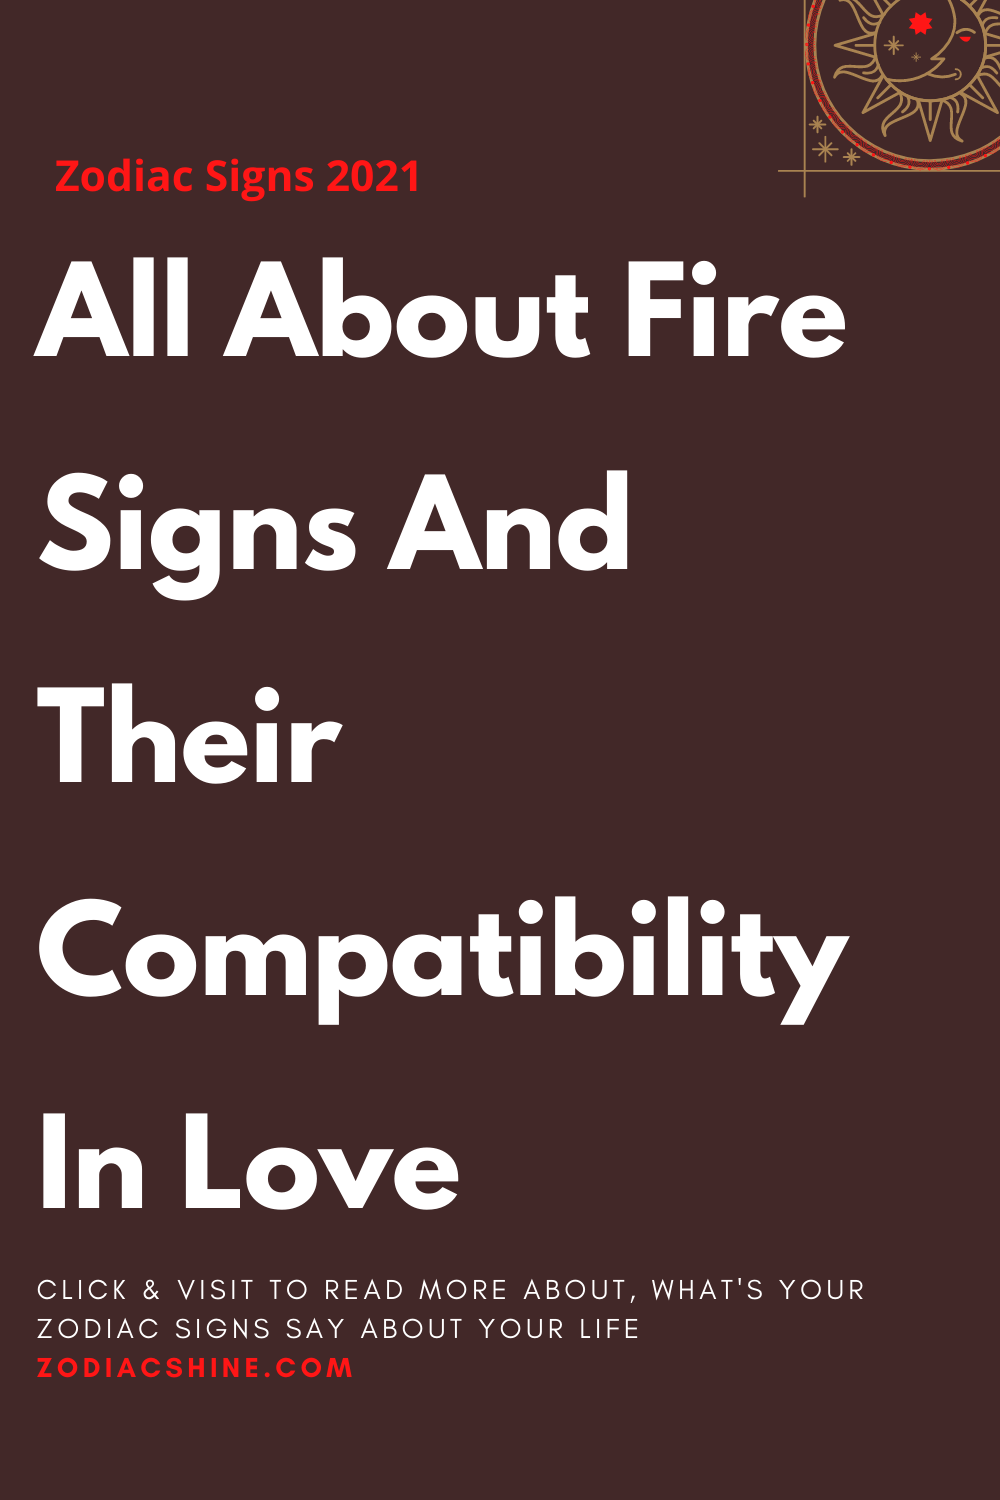 All About Fire Signs And Their Compatibility In Love